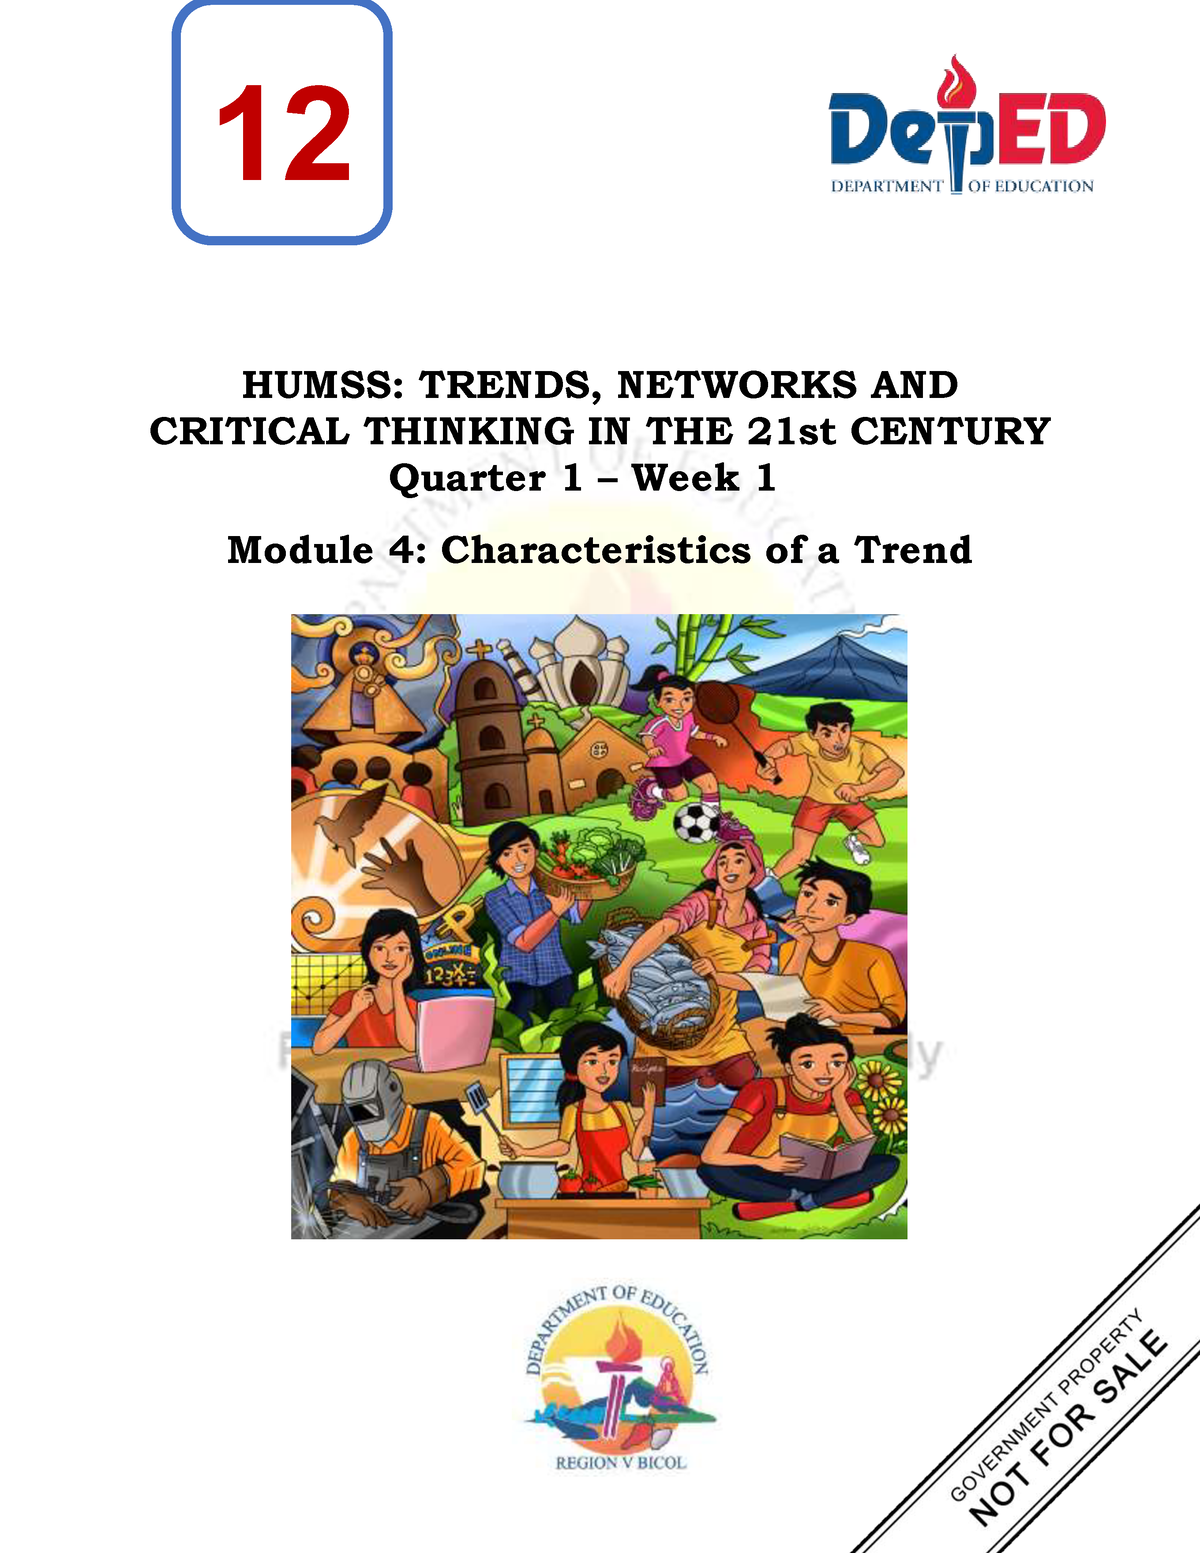 trends network and critical thinking in the 21st century teaching guide